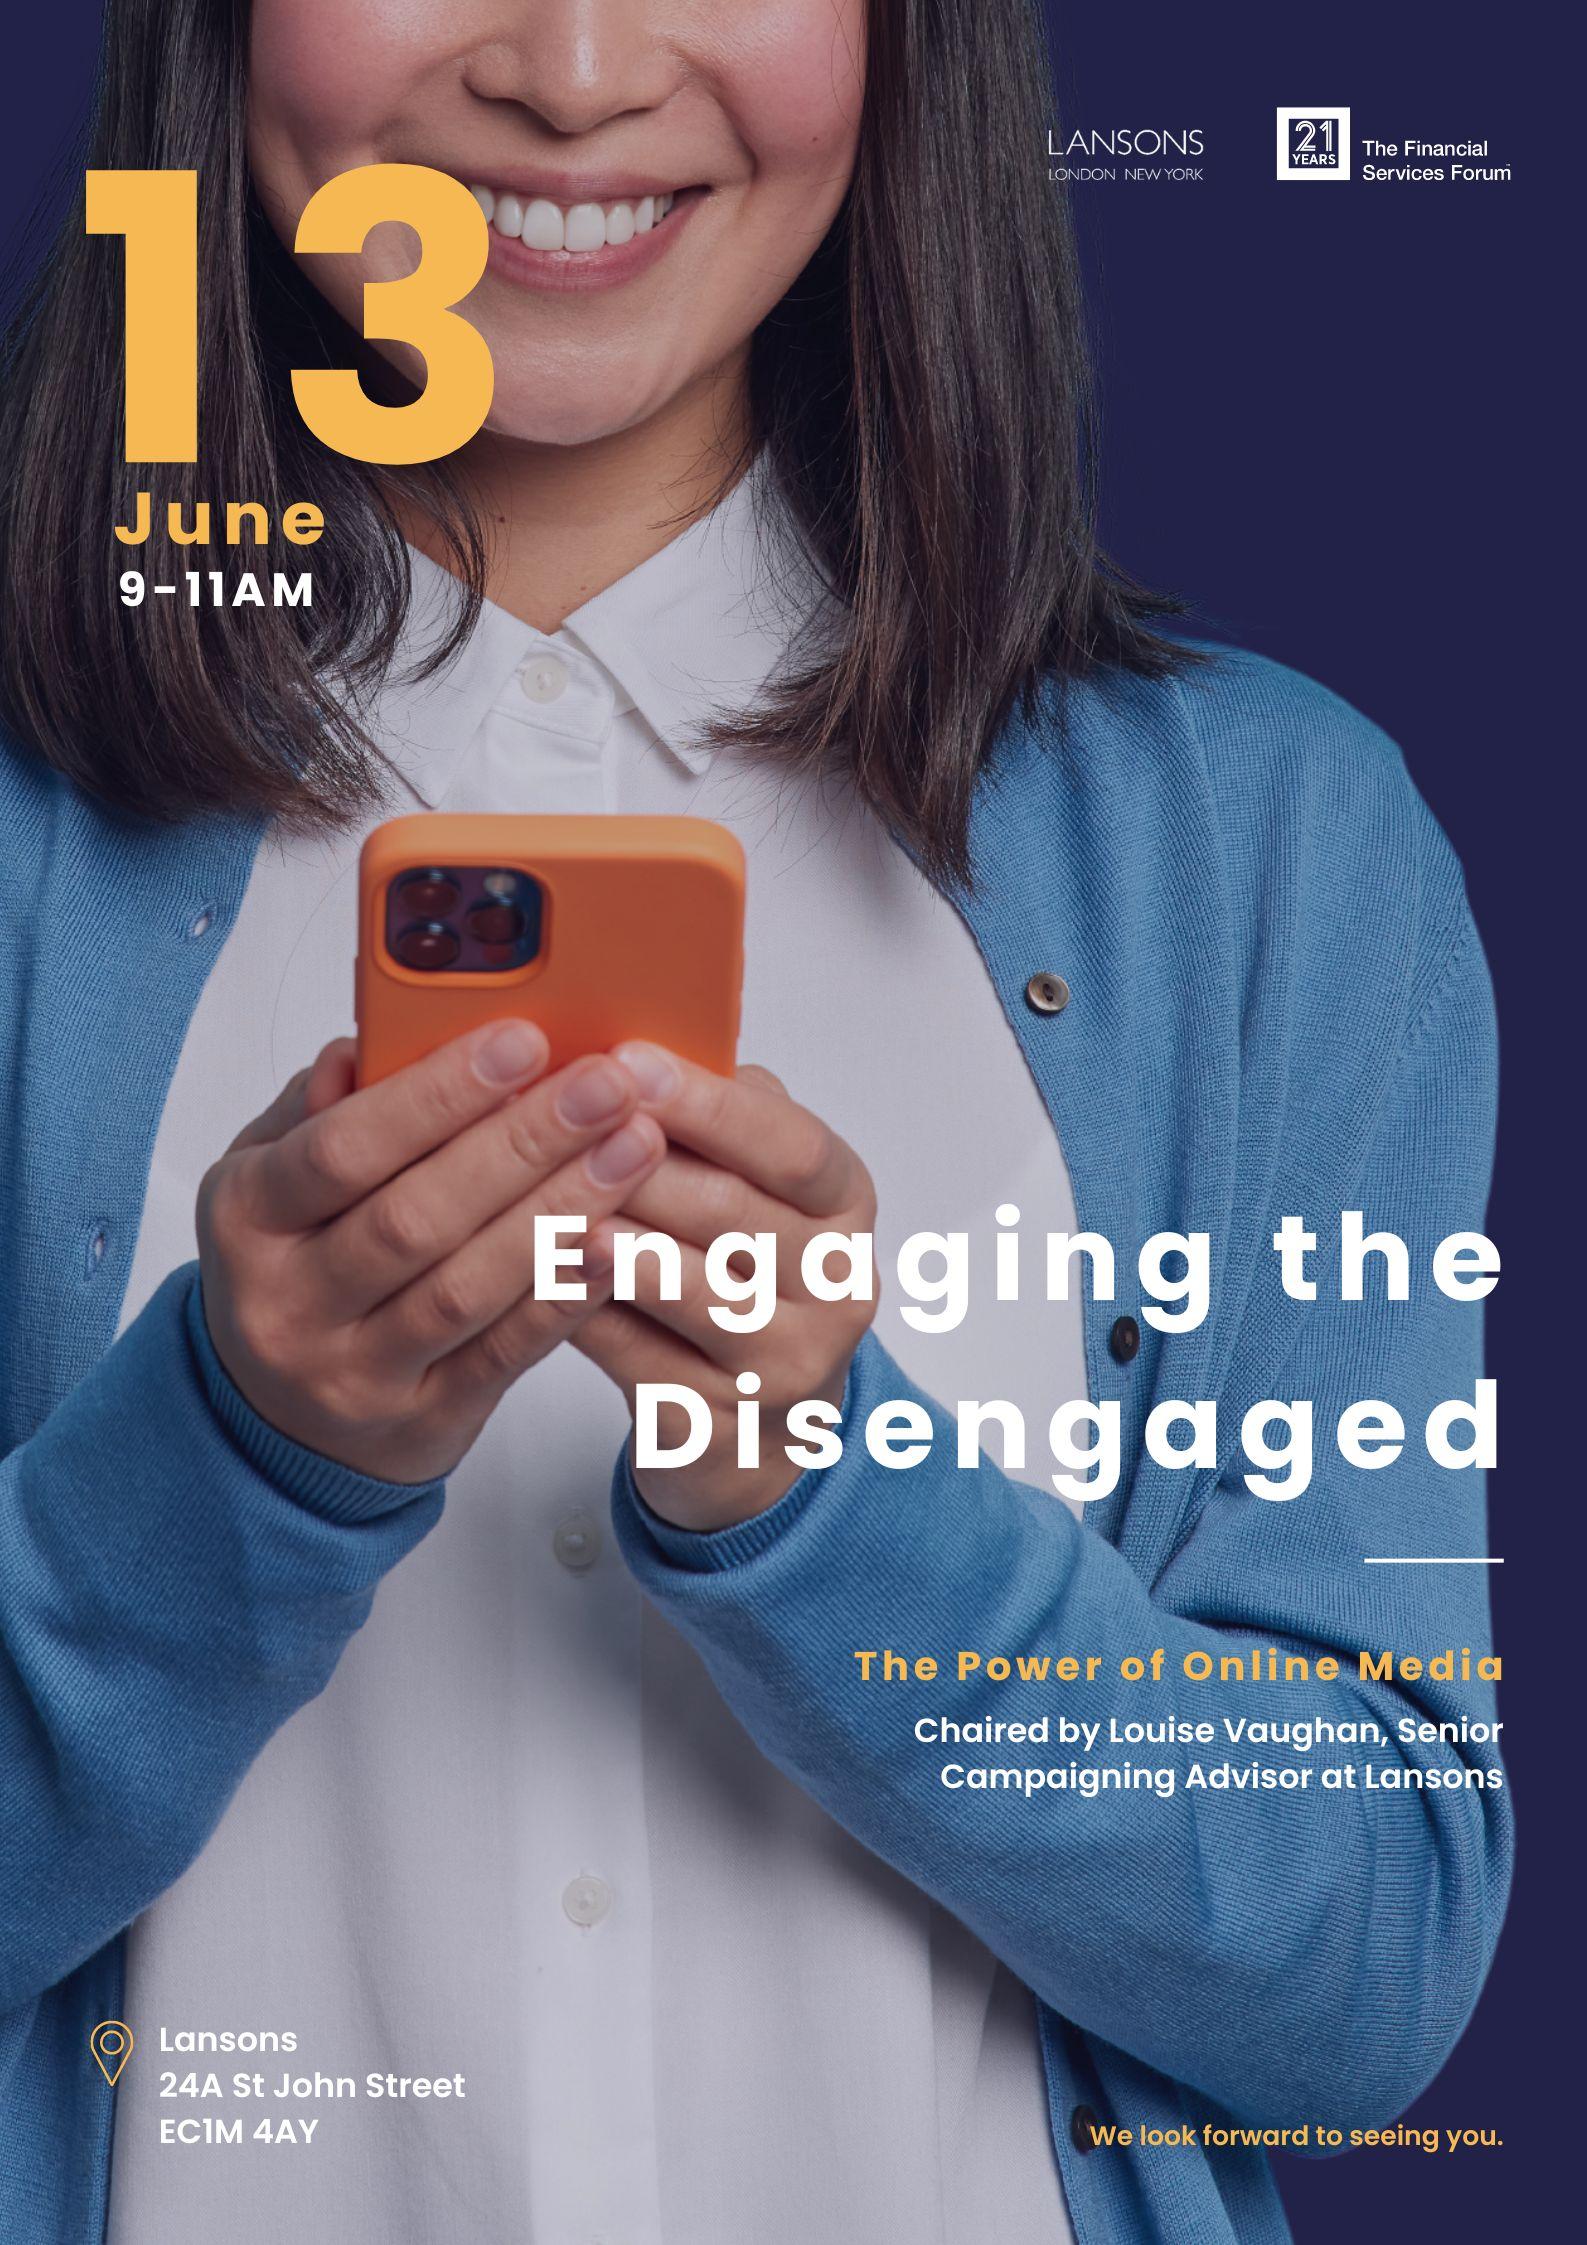 fsf-poster-engaging-the-disengaged-poster